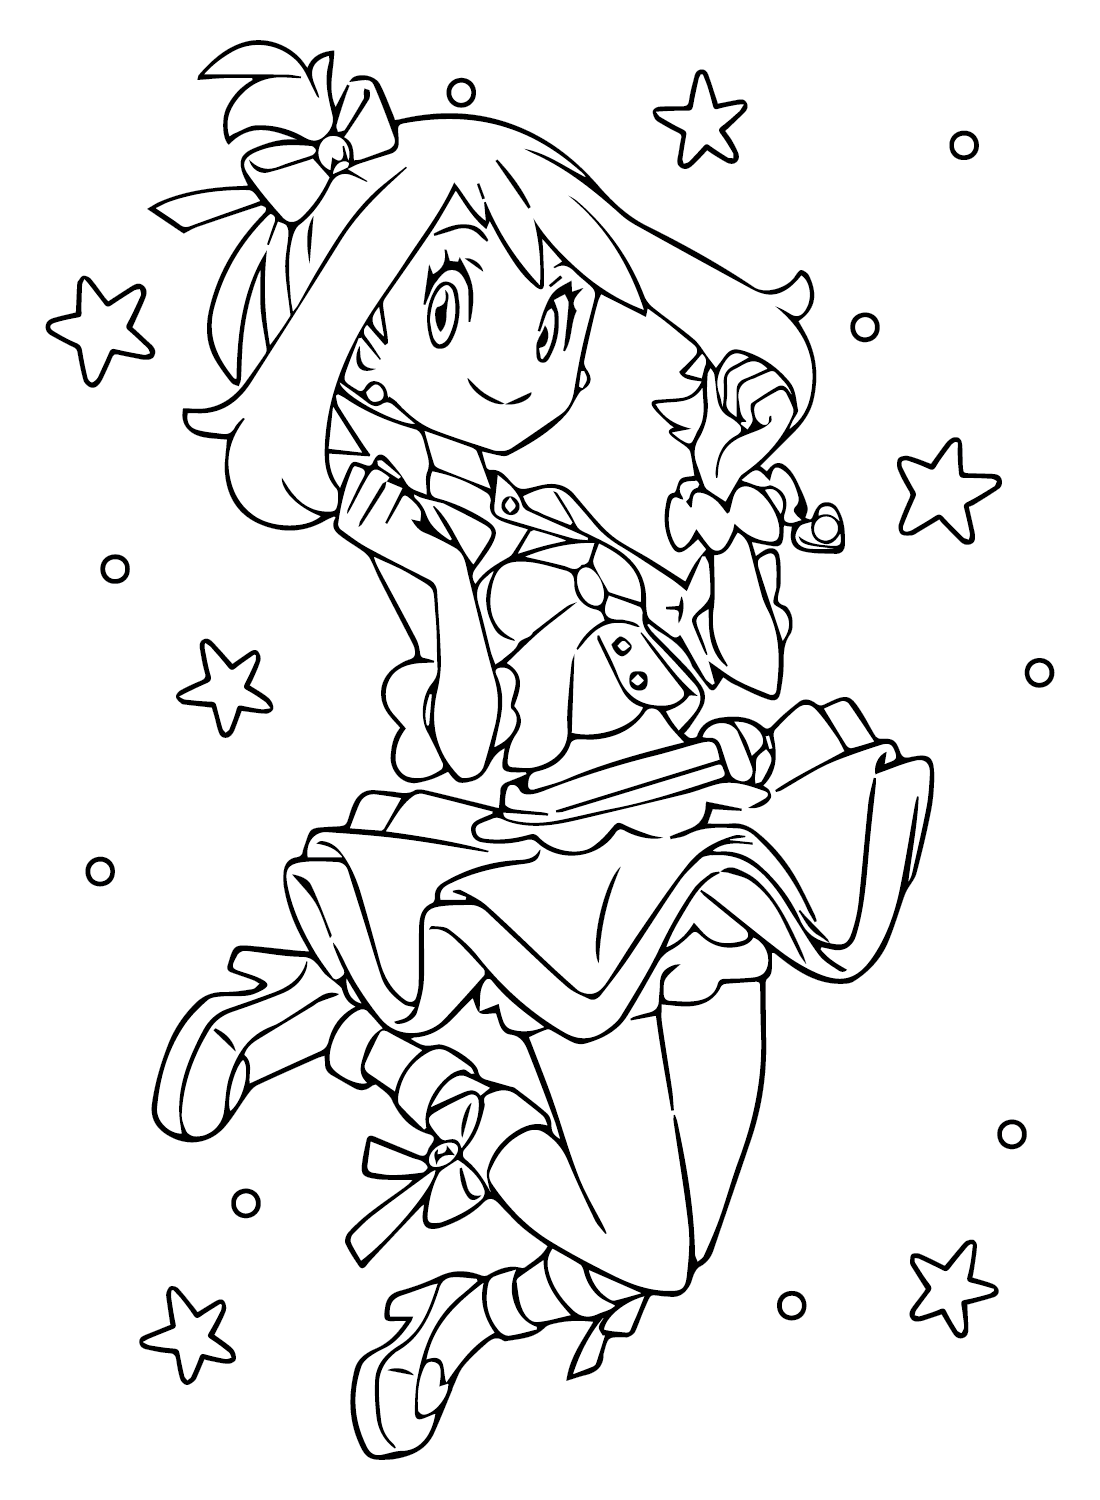 May Pokemon Coloring Page from May Pokemon